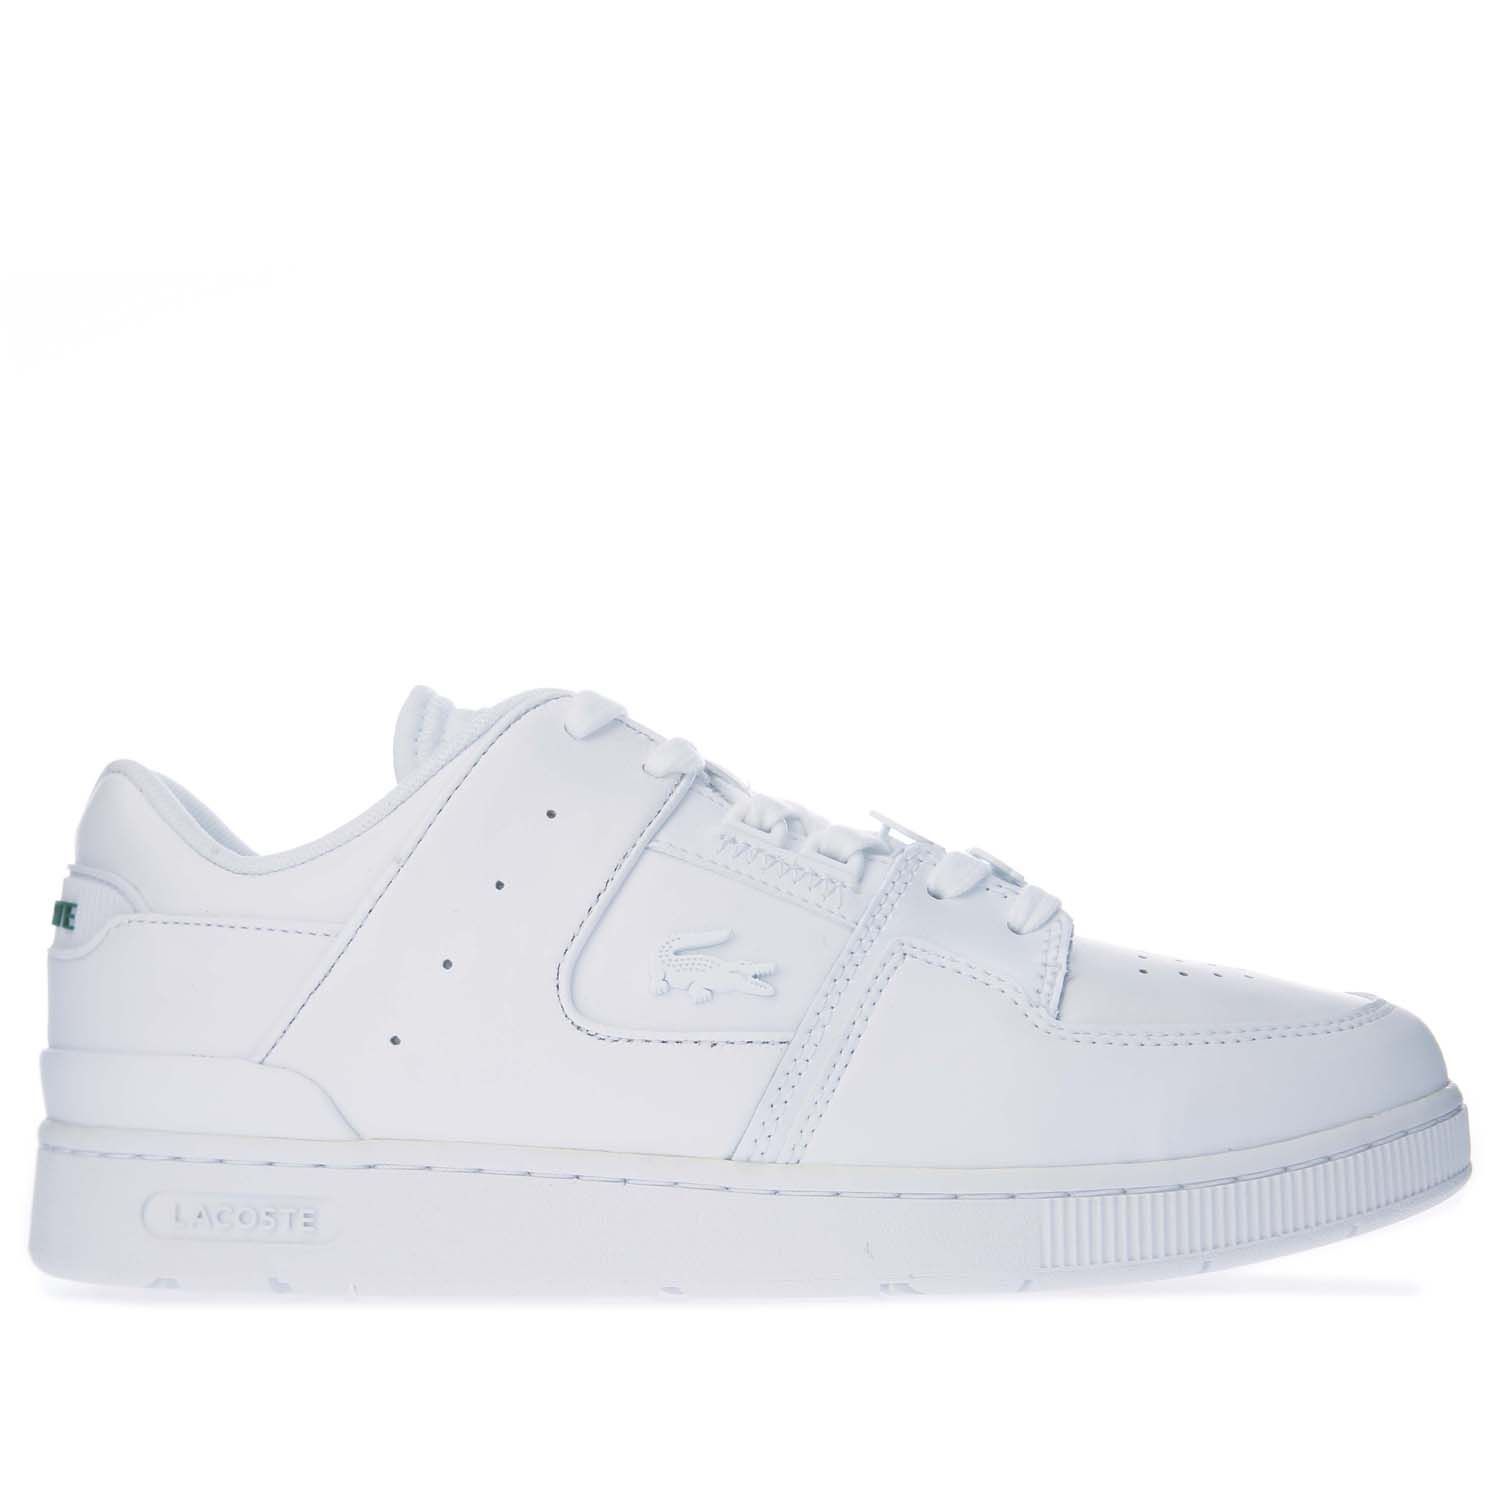 Womens Lacoste Court Cage Trainers in white.- Leather upper.- Lace up fastening.- Padded tongue and cuff.- Ortholite sockliner for comfort and odour control.- Low-profile design.- Lacoste branding at tongue.- Contrast heel patch with Lacoste lettering.- Perforated toe vamp.- Textured grip tread.- Durable rubber outsole.- Leather upper  Textile lining  Synthetic sole.- Ref: 742SFA003321G